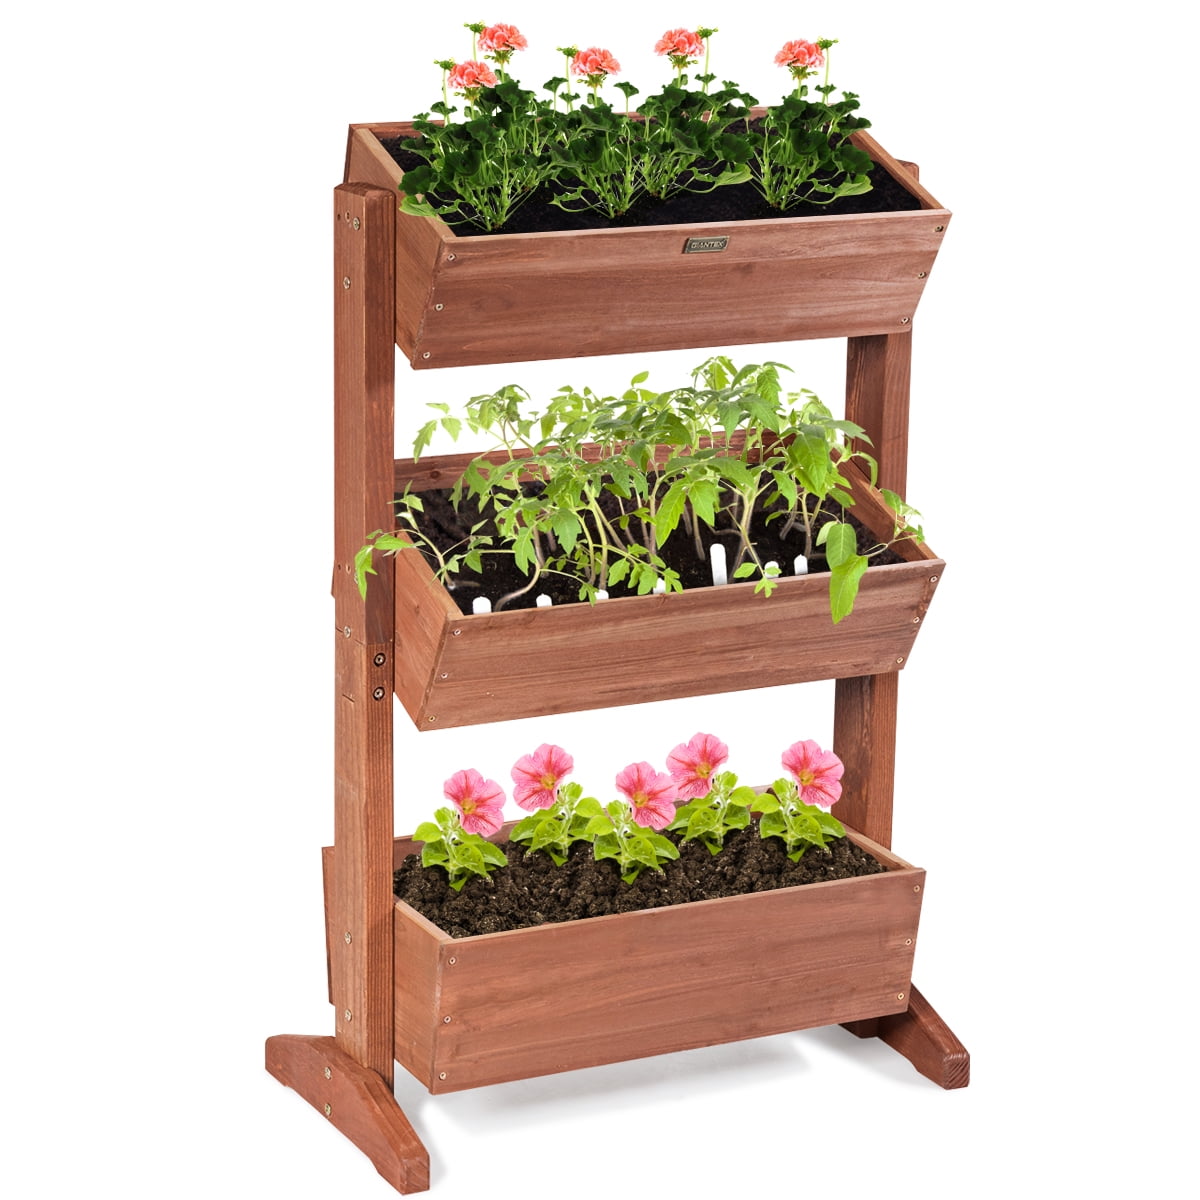 Details about   3 Tier Raised Garden Bed Vertical Freestanding Planter With Three Holes Design 